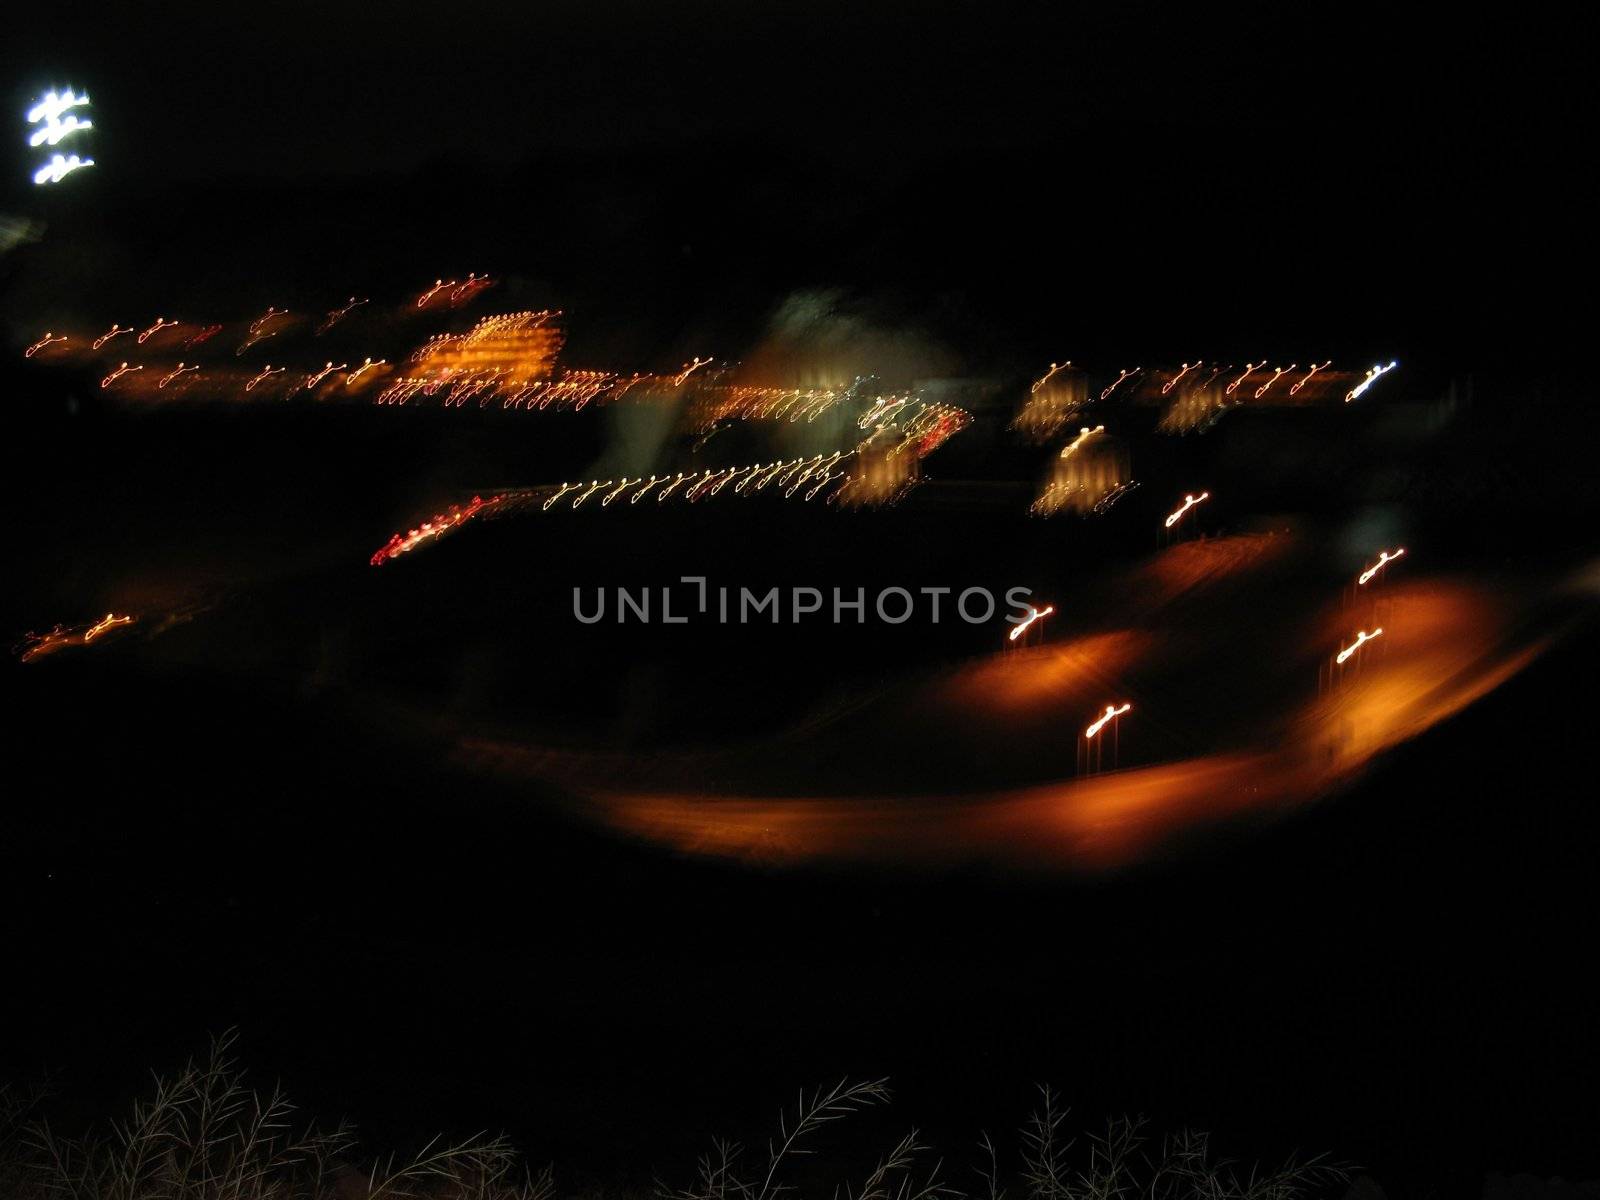 An image of the lights of Las Vegas from outside the city, with grass leaves in the bottom foreground.